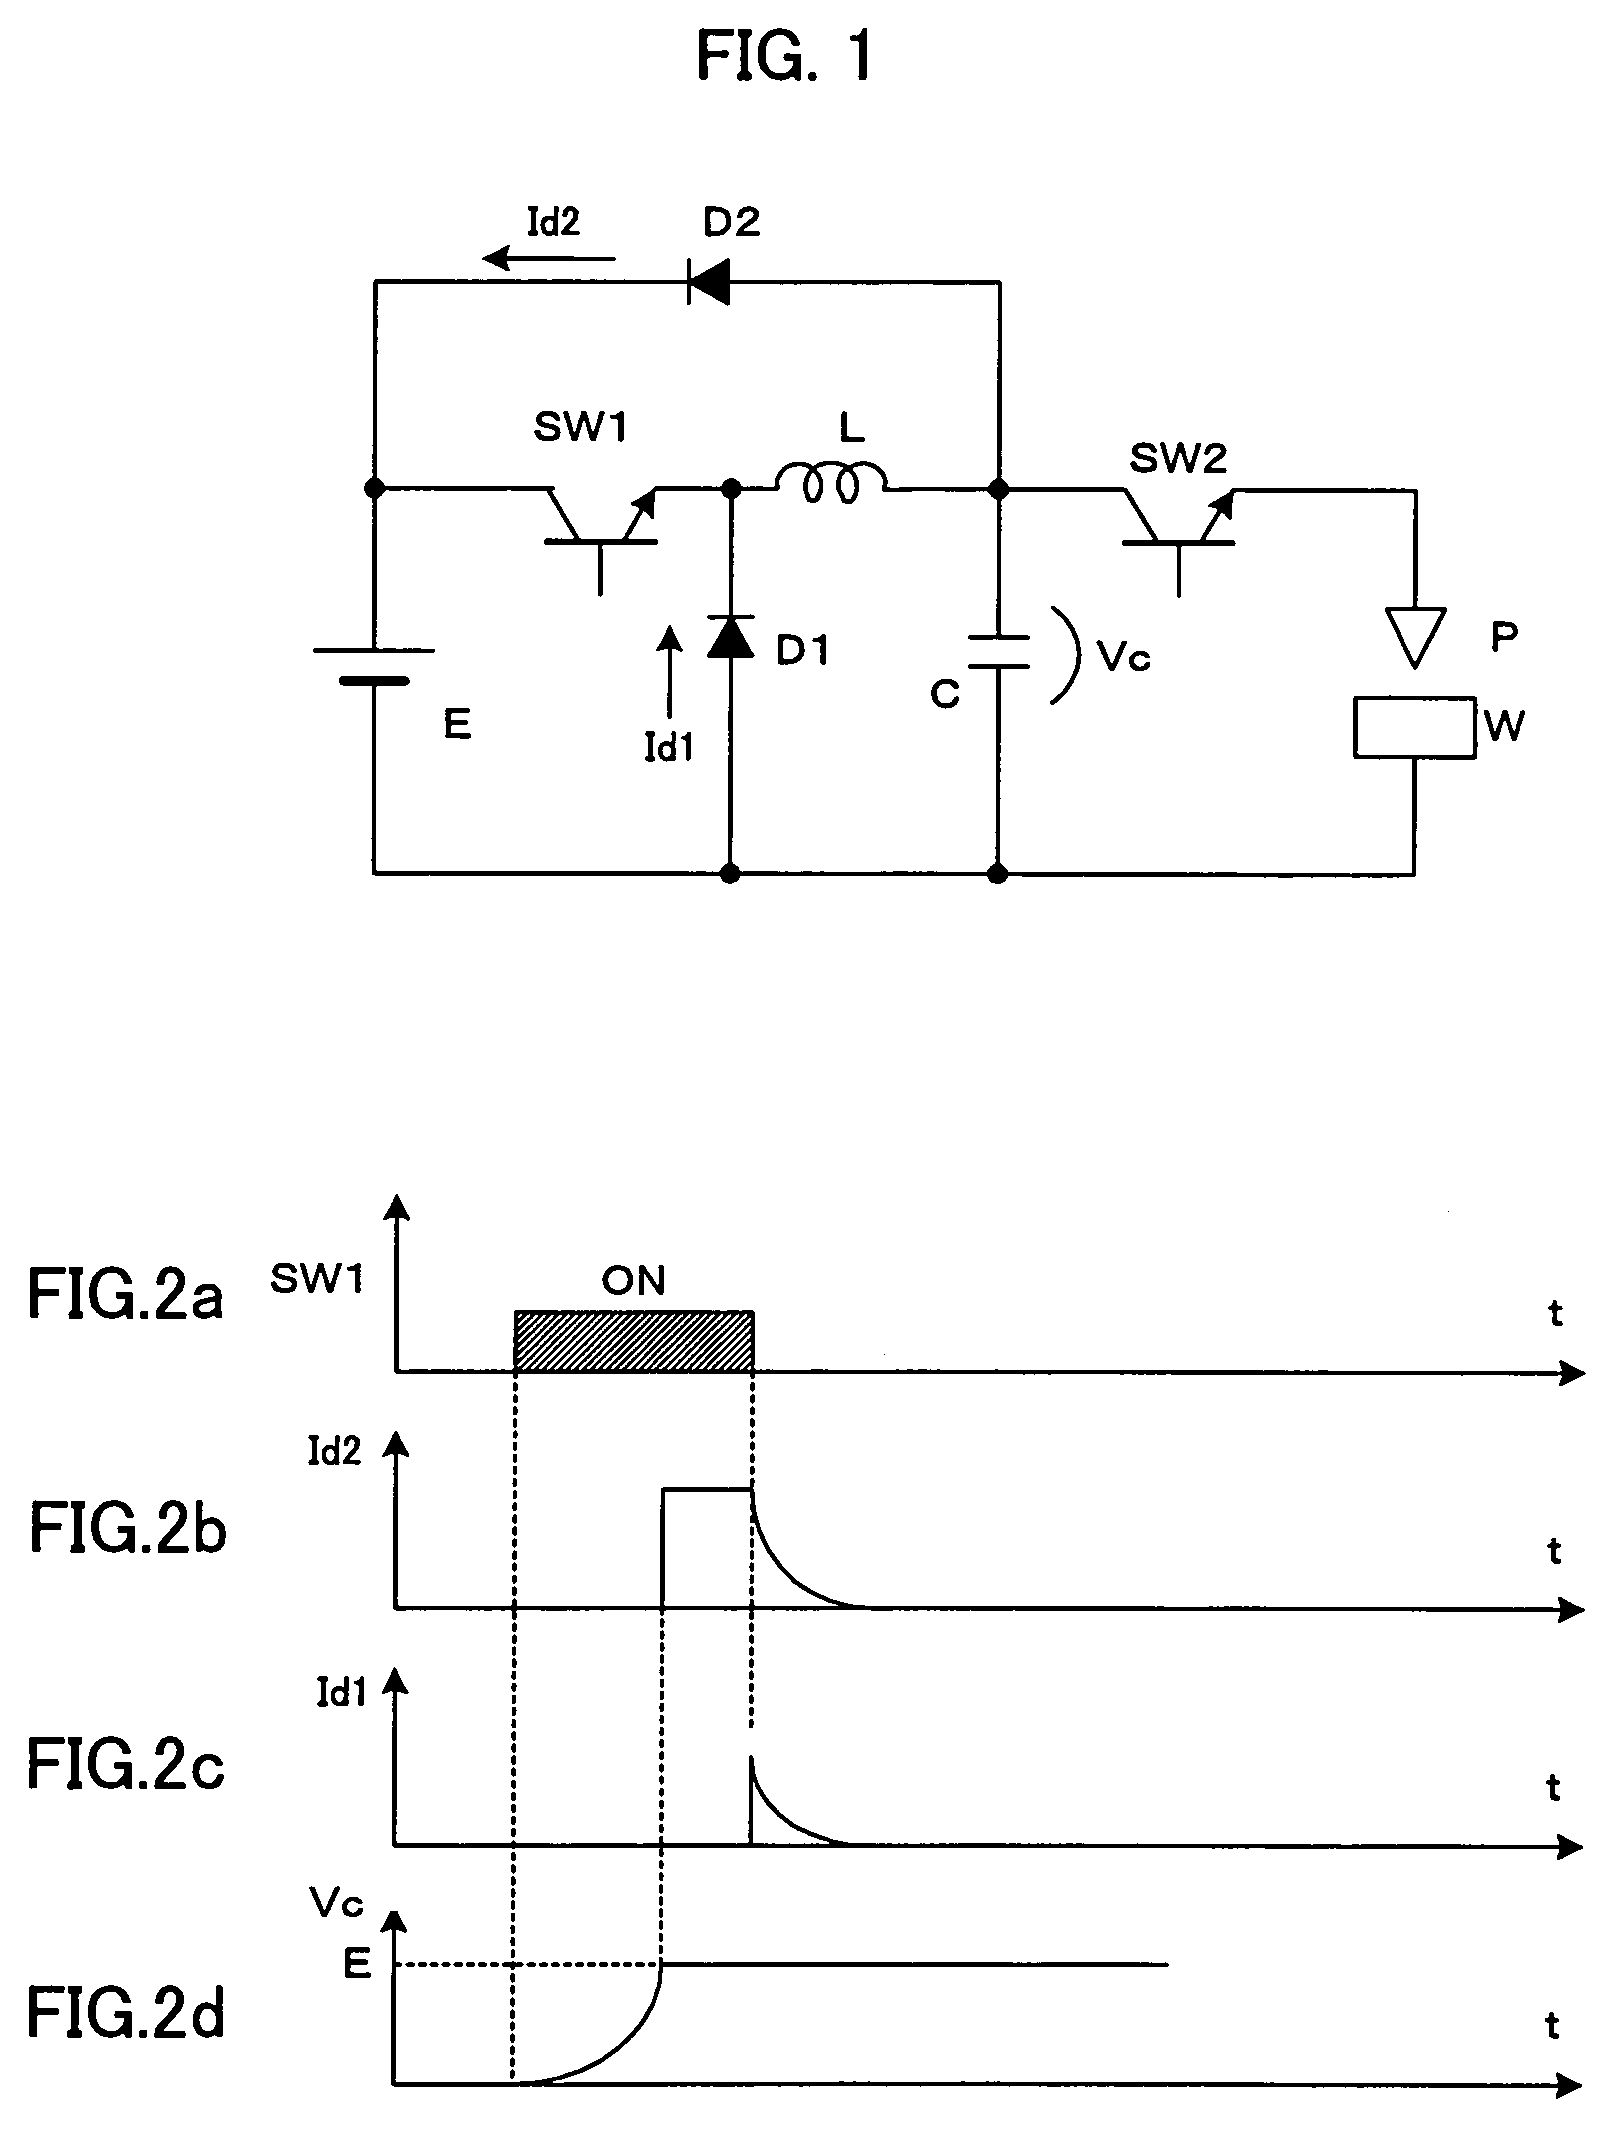 Power supply device for electric discharge machining